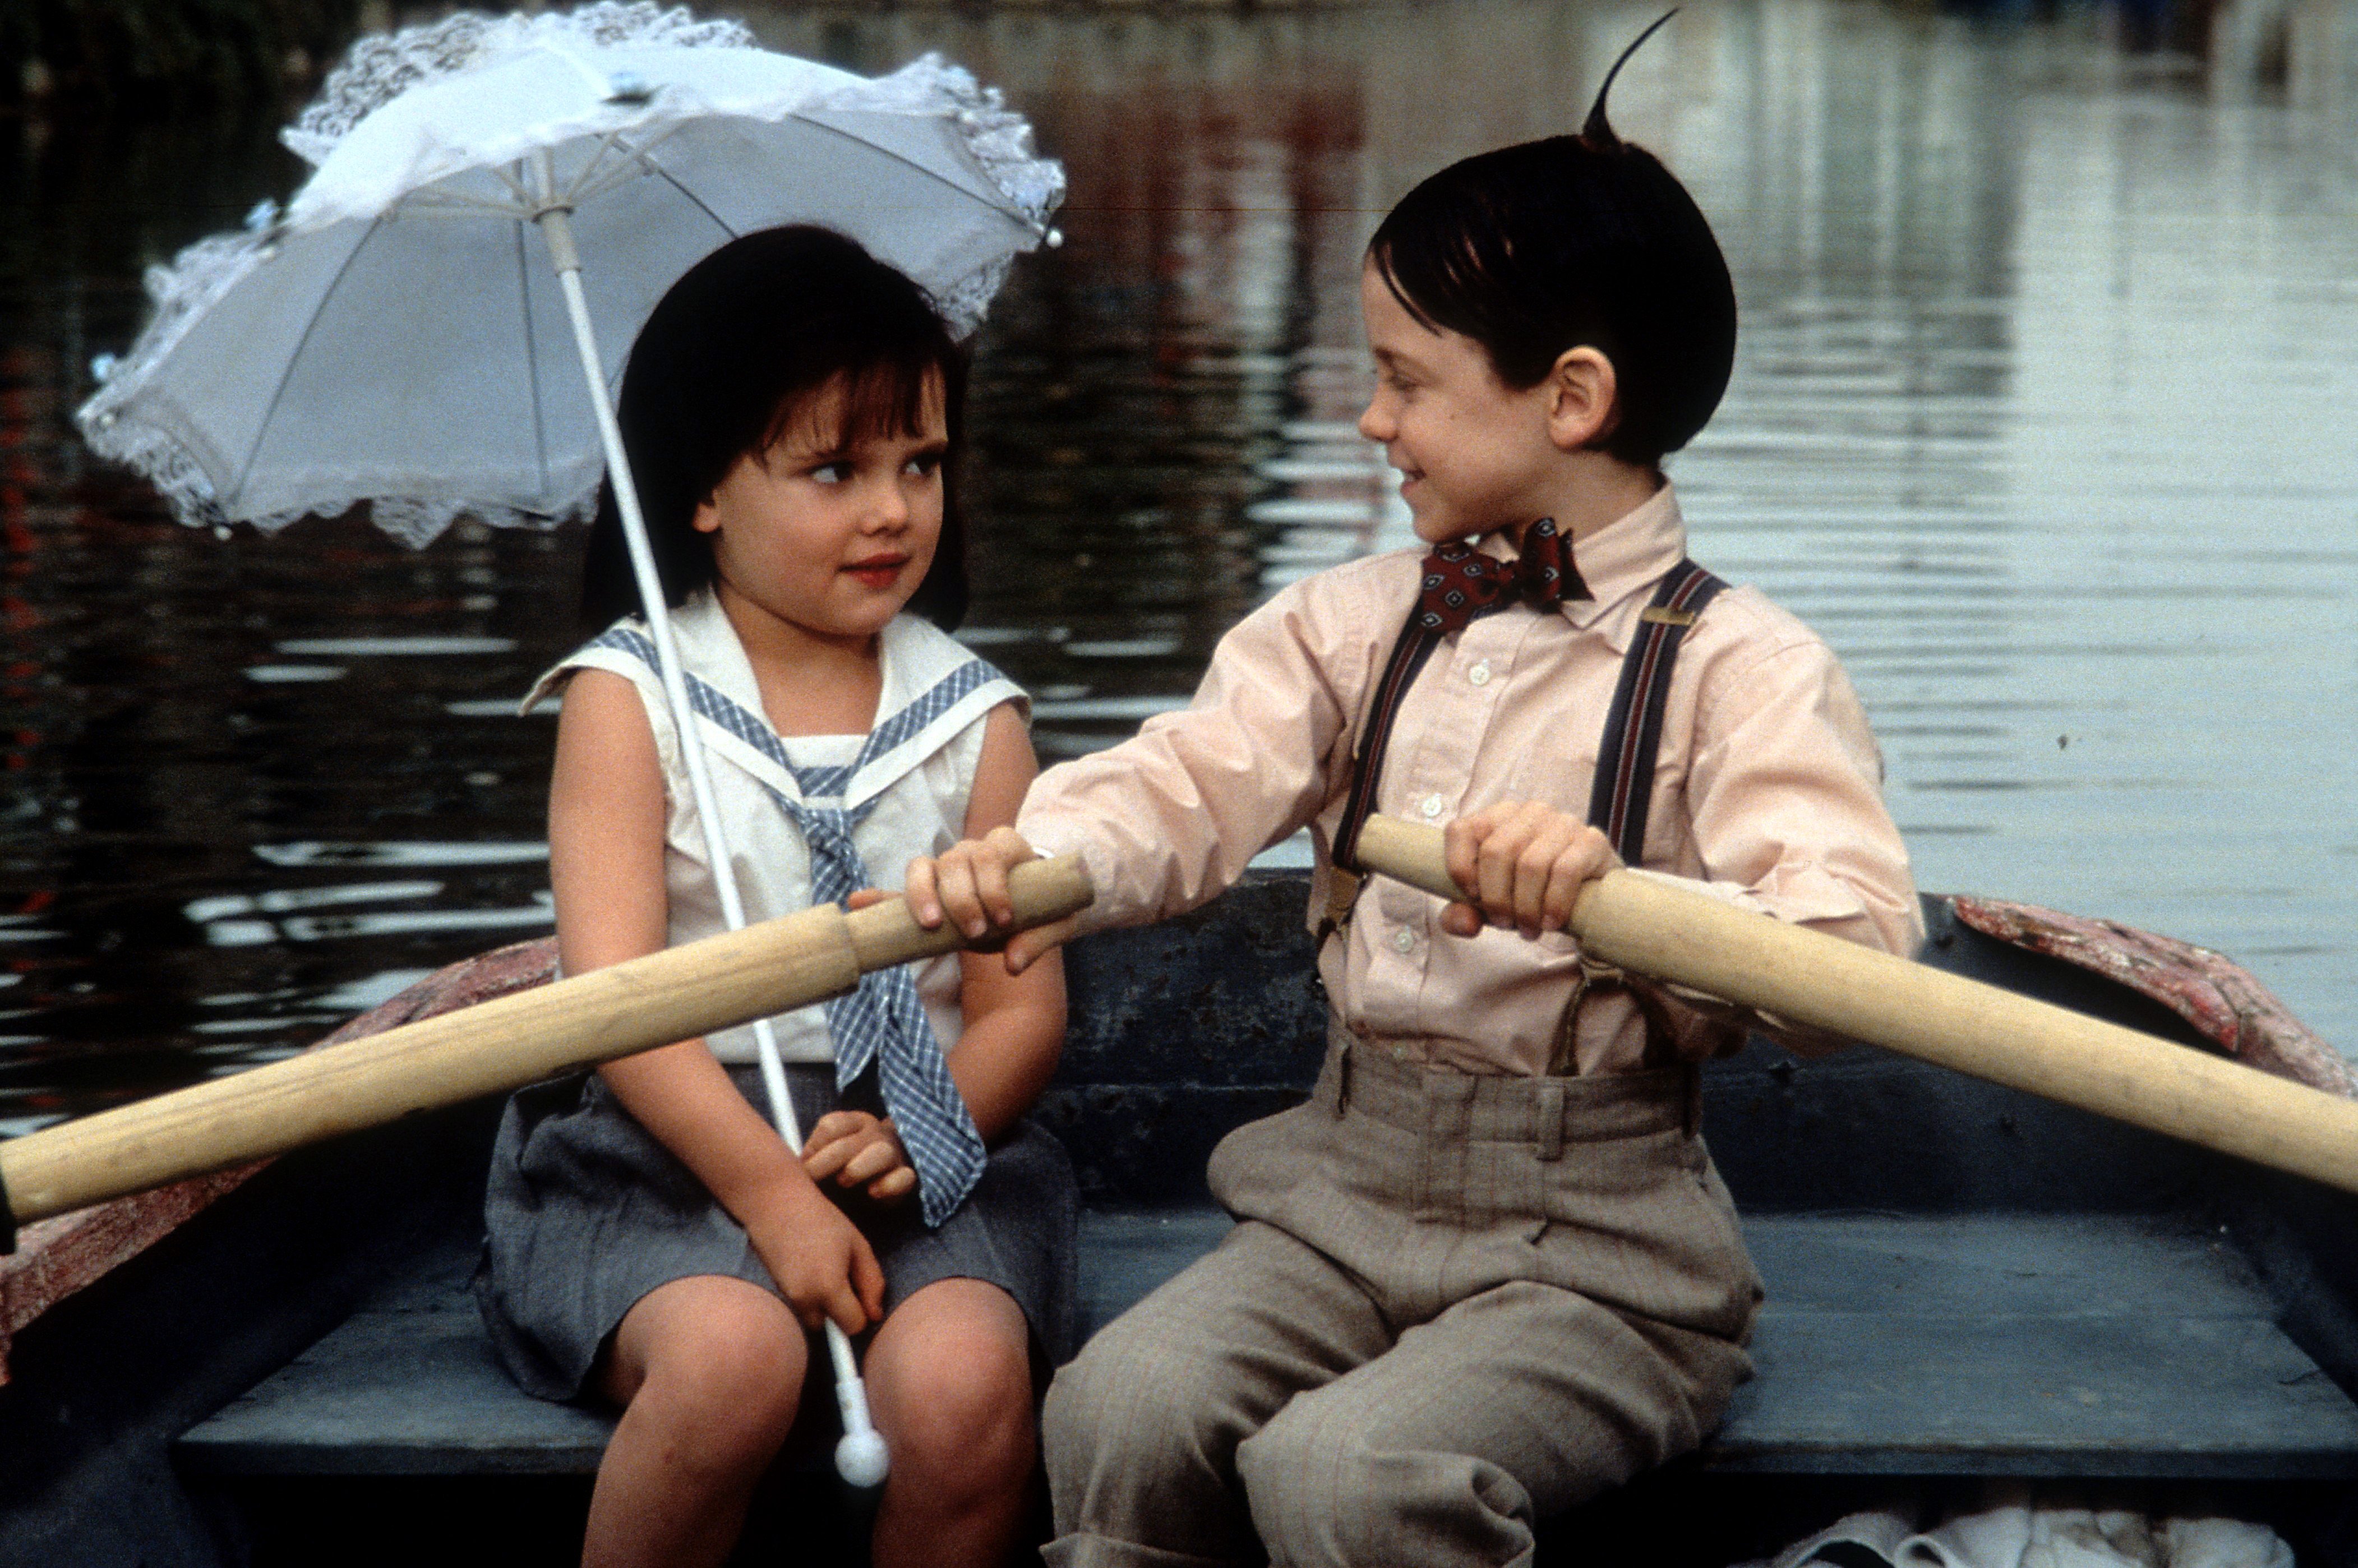 Bug Hall rowing a boat with Brittany Ashton Holmes in a scene from the film "The Little Rascals," 1994. | Source: Getty Images